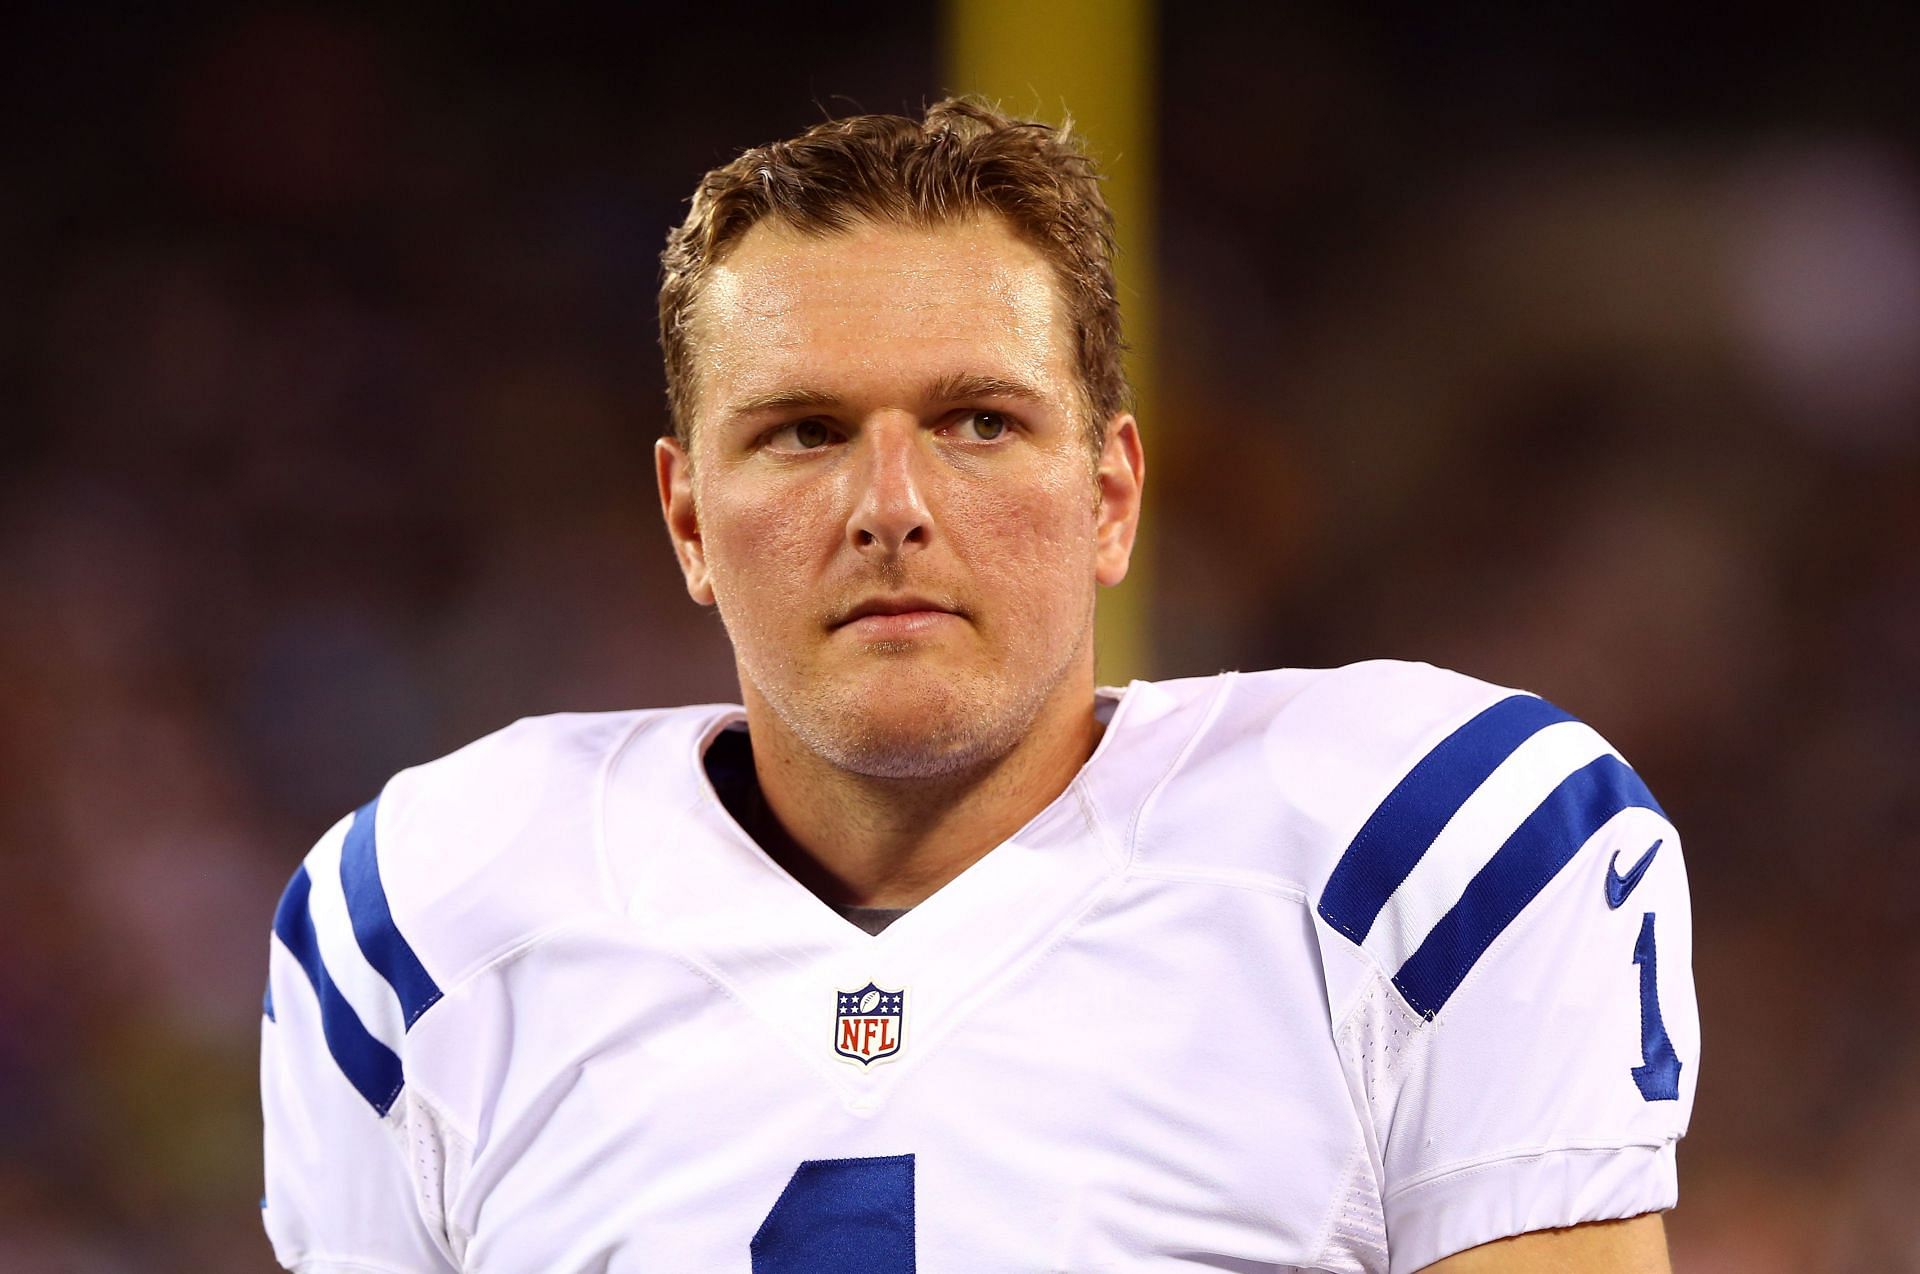 The punter with the Indianapolis Colts (2009 - 2017)